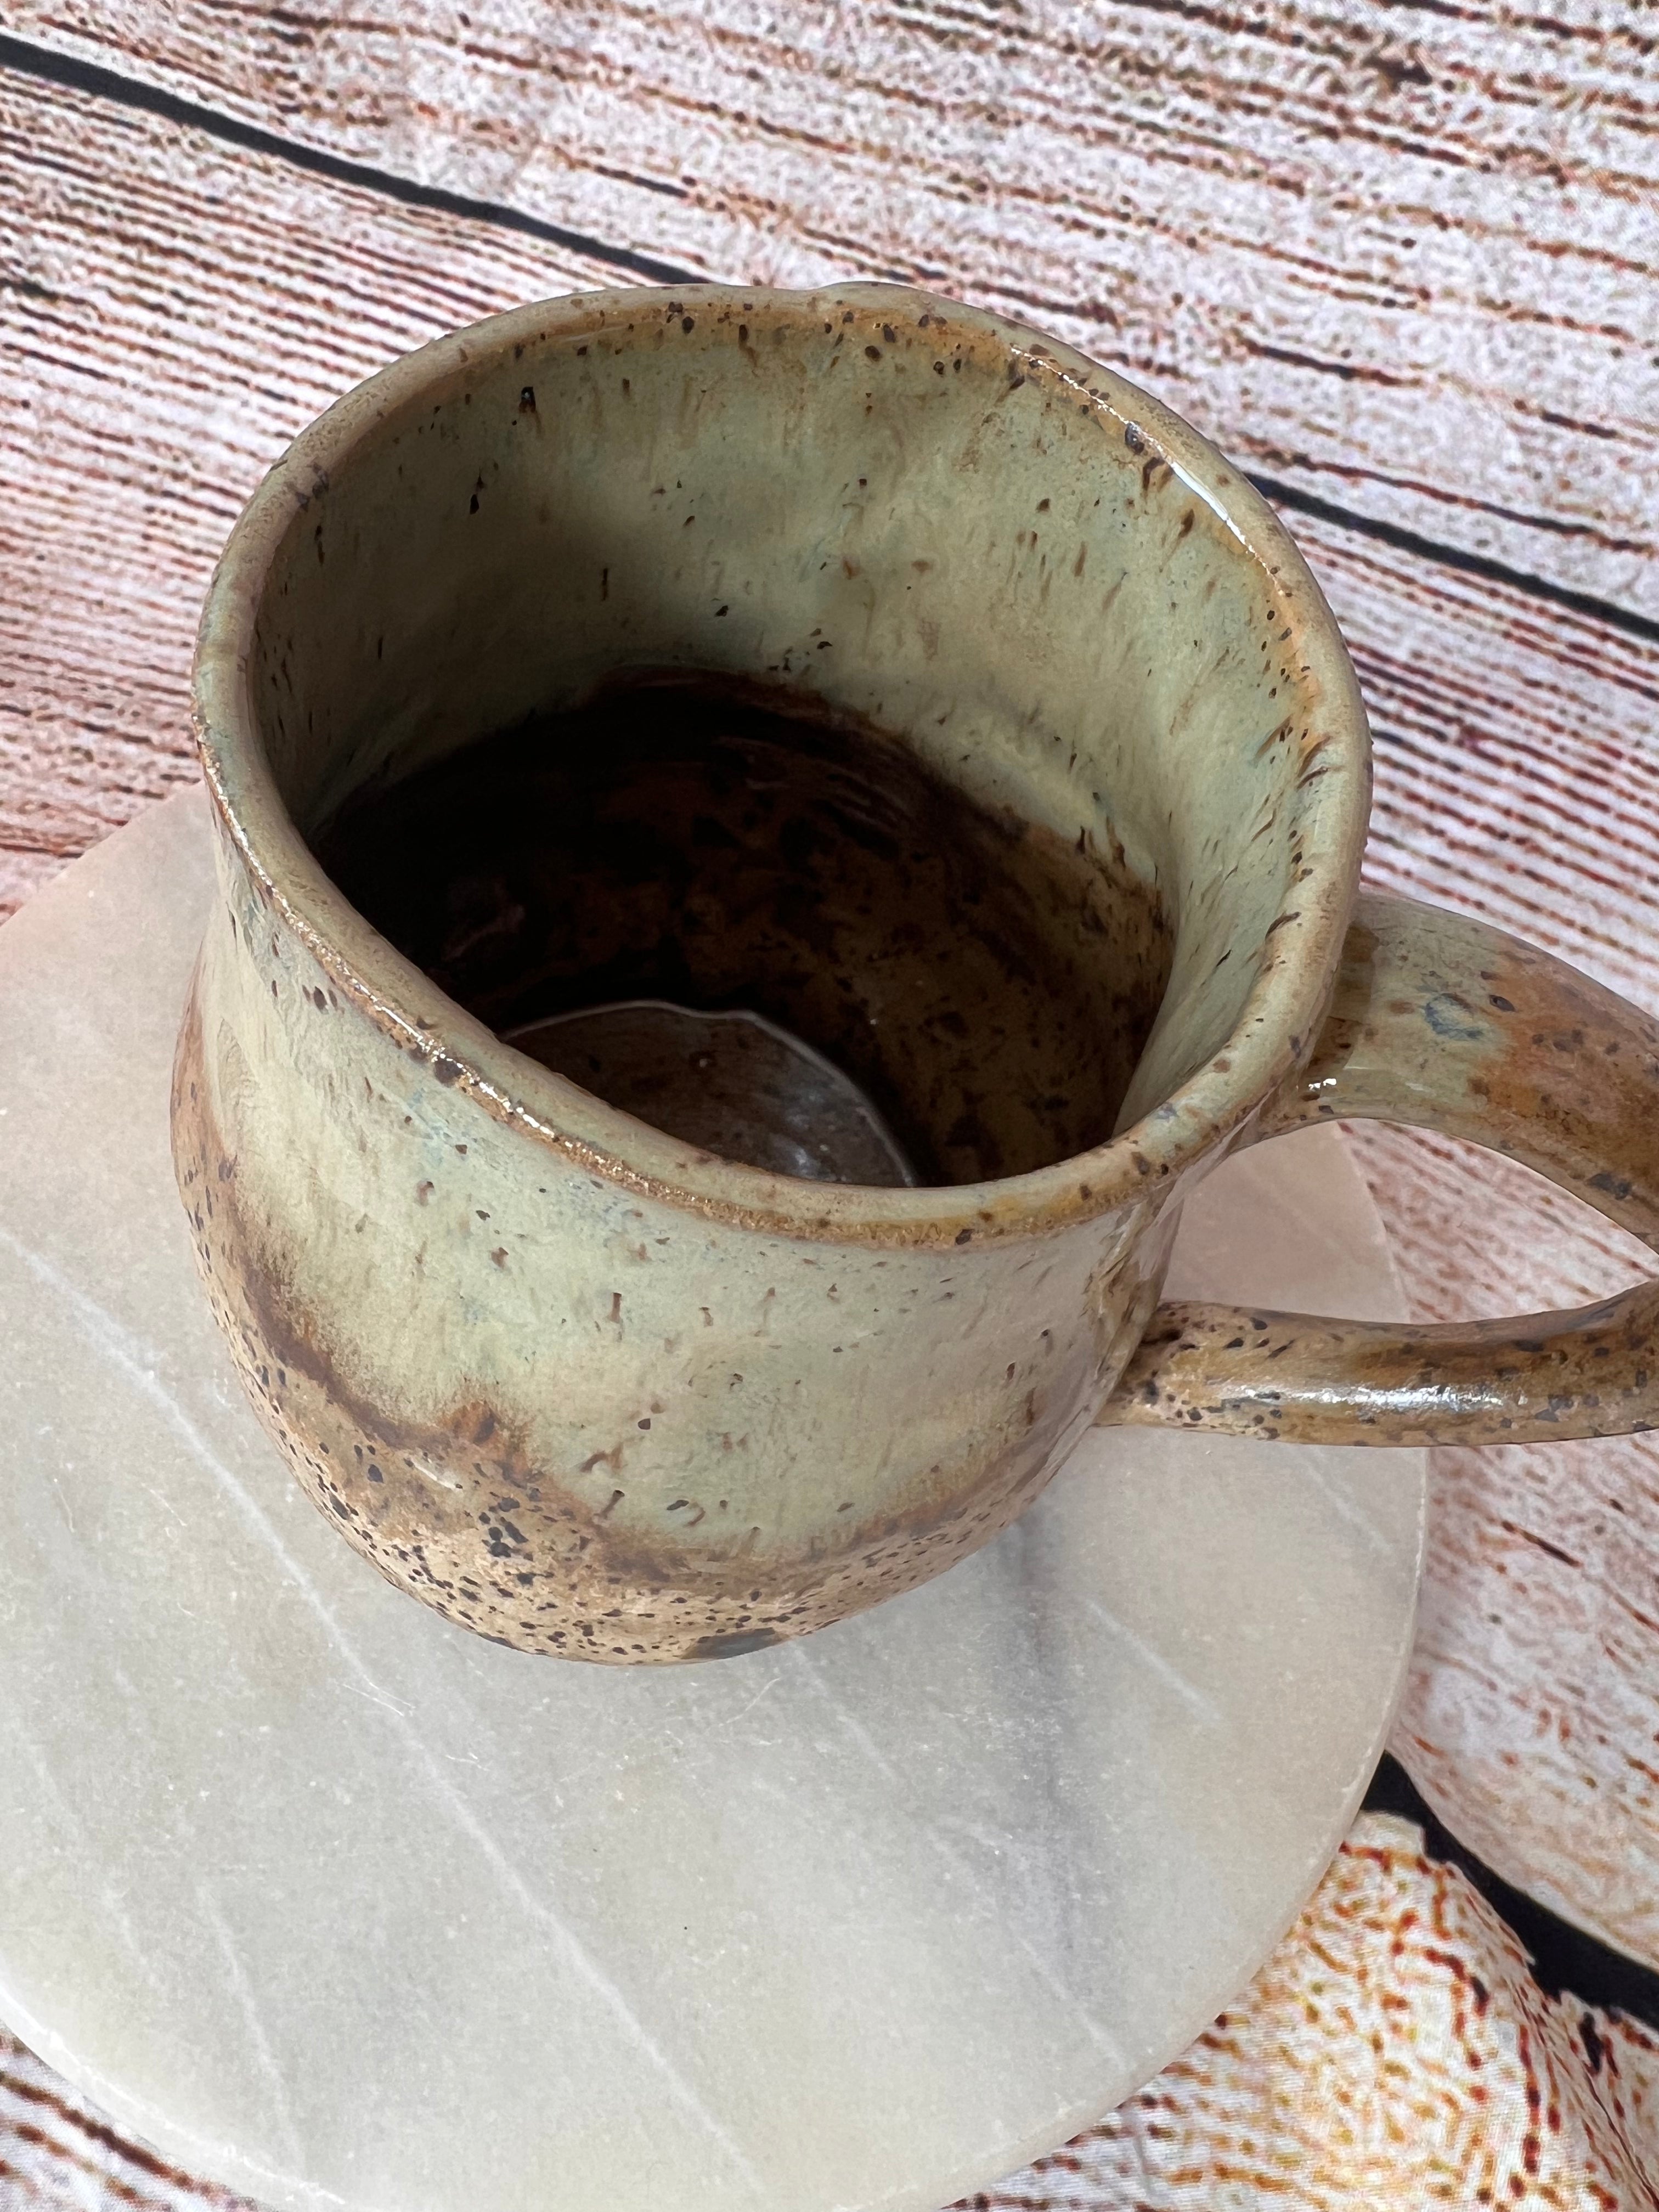 Green and Brown Speckled Mug